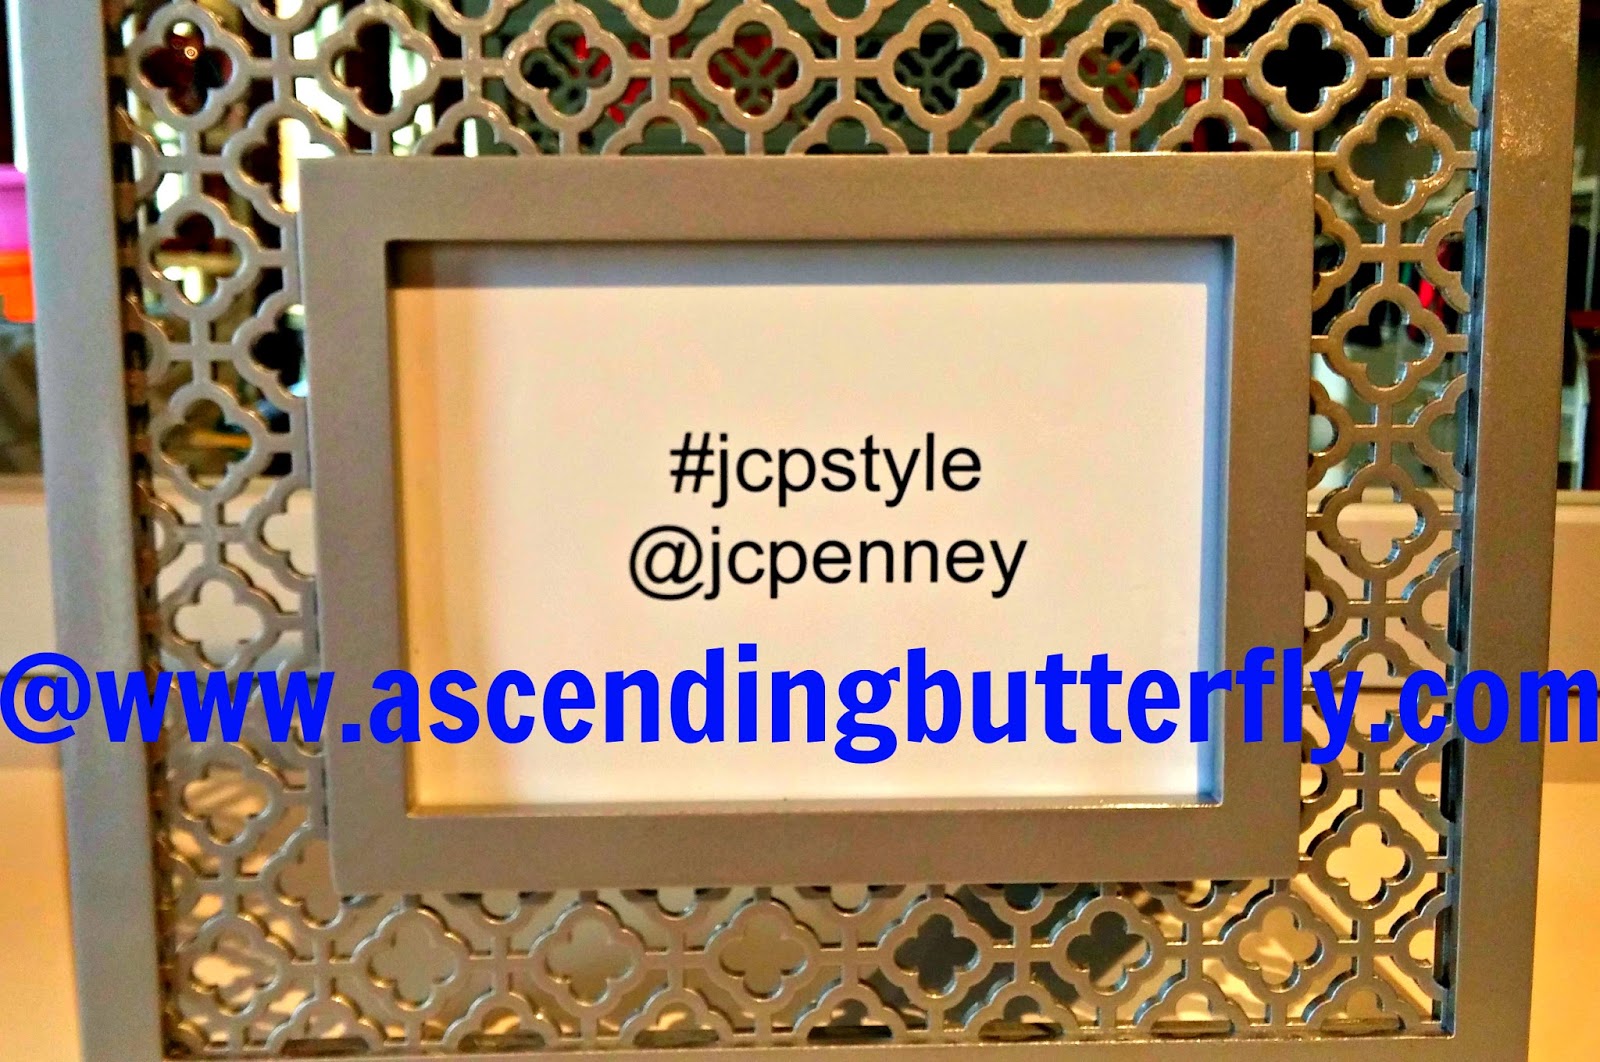 @jcpenney #BTS #Fashion #jcpstyle Framed Signage